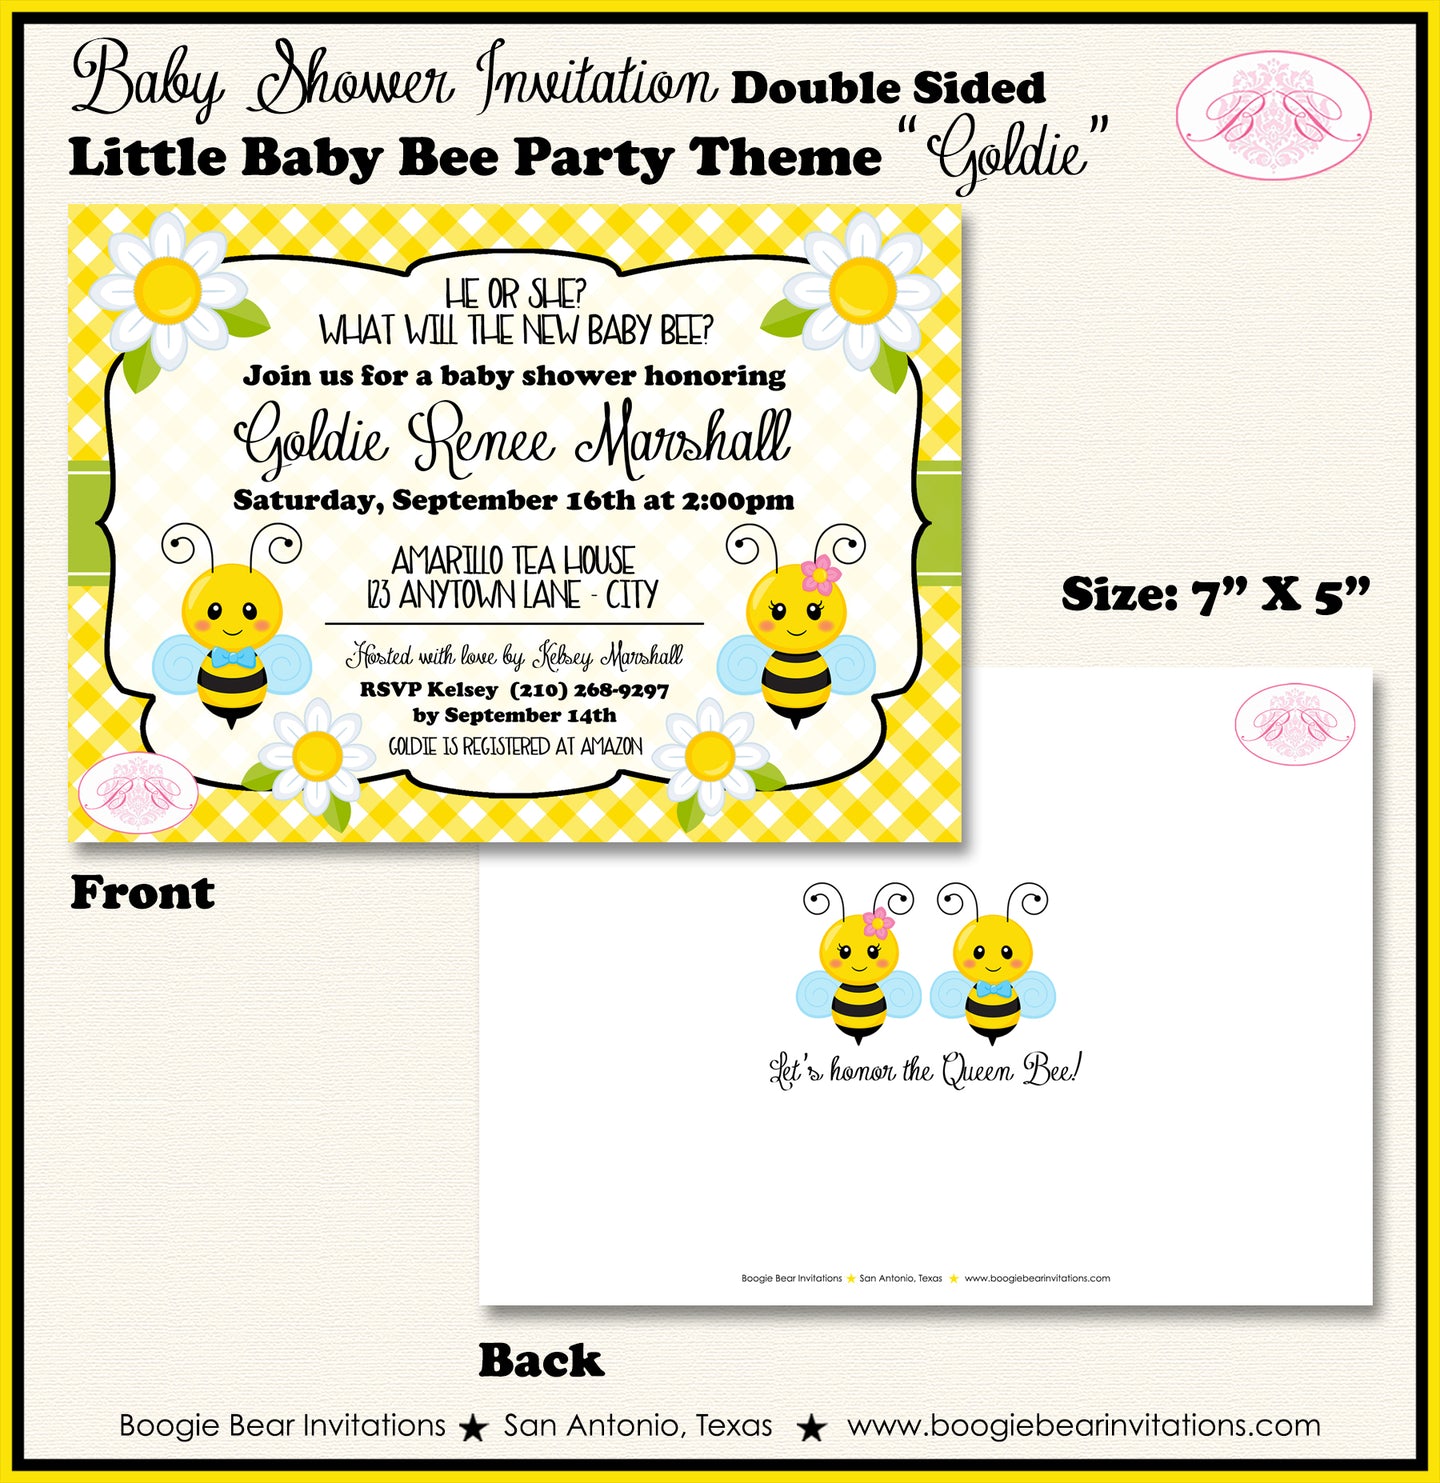 Bee Baby Shower Reveal Party Invitation Little Boy Girl Boogie Bear Invitations Goldie Theme Paperless Printable Printed